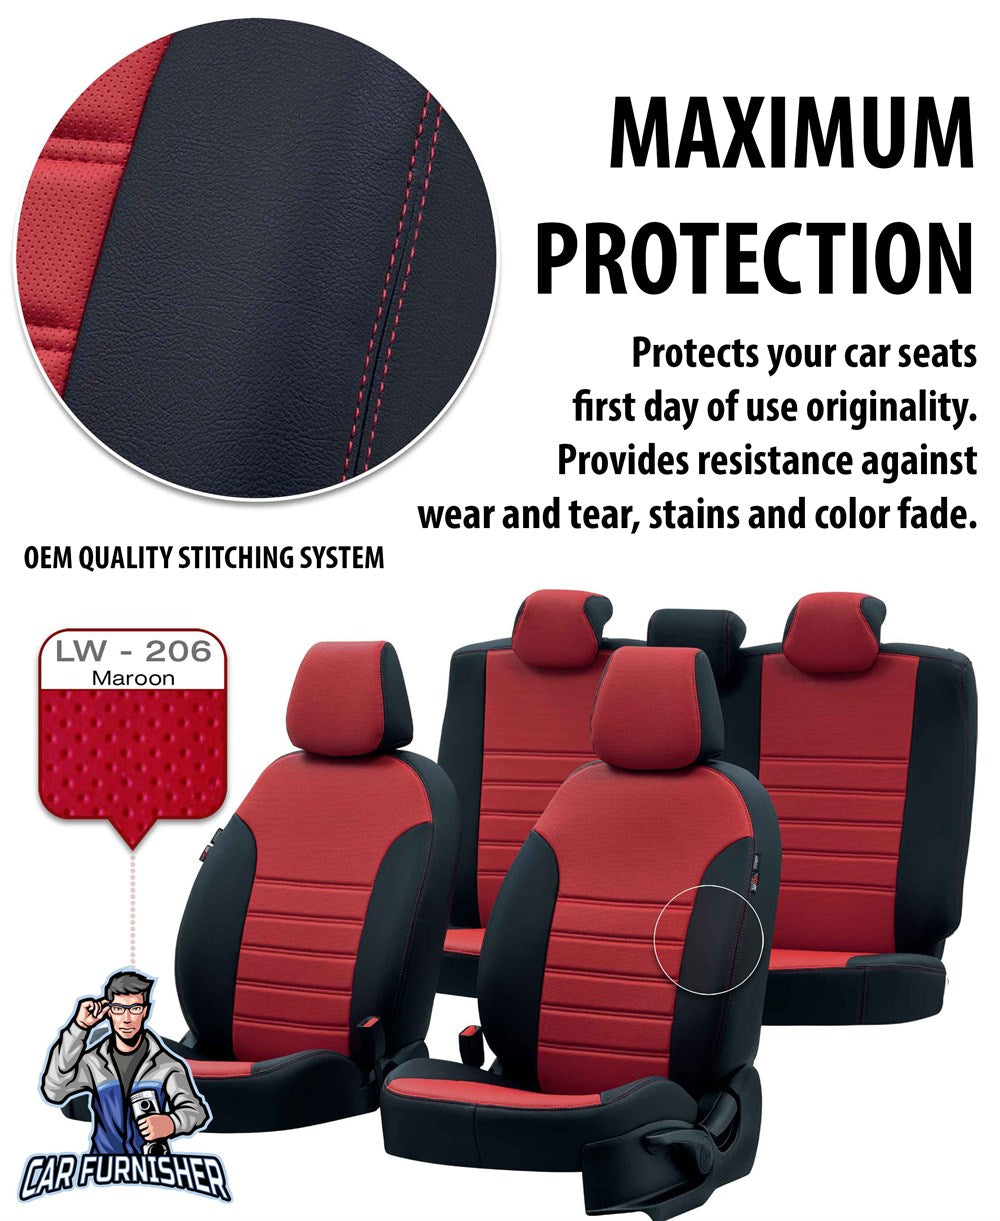 Mitsubishi Space Star Seat Cover Istanbul Leather Design Burgundy Leather